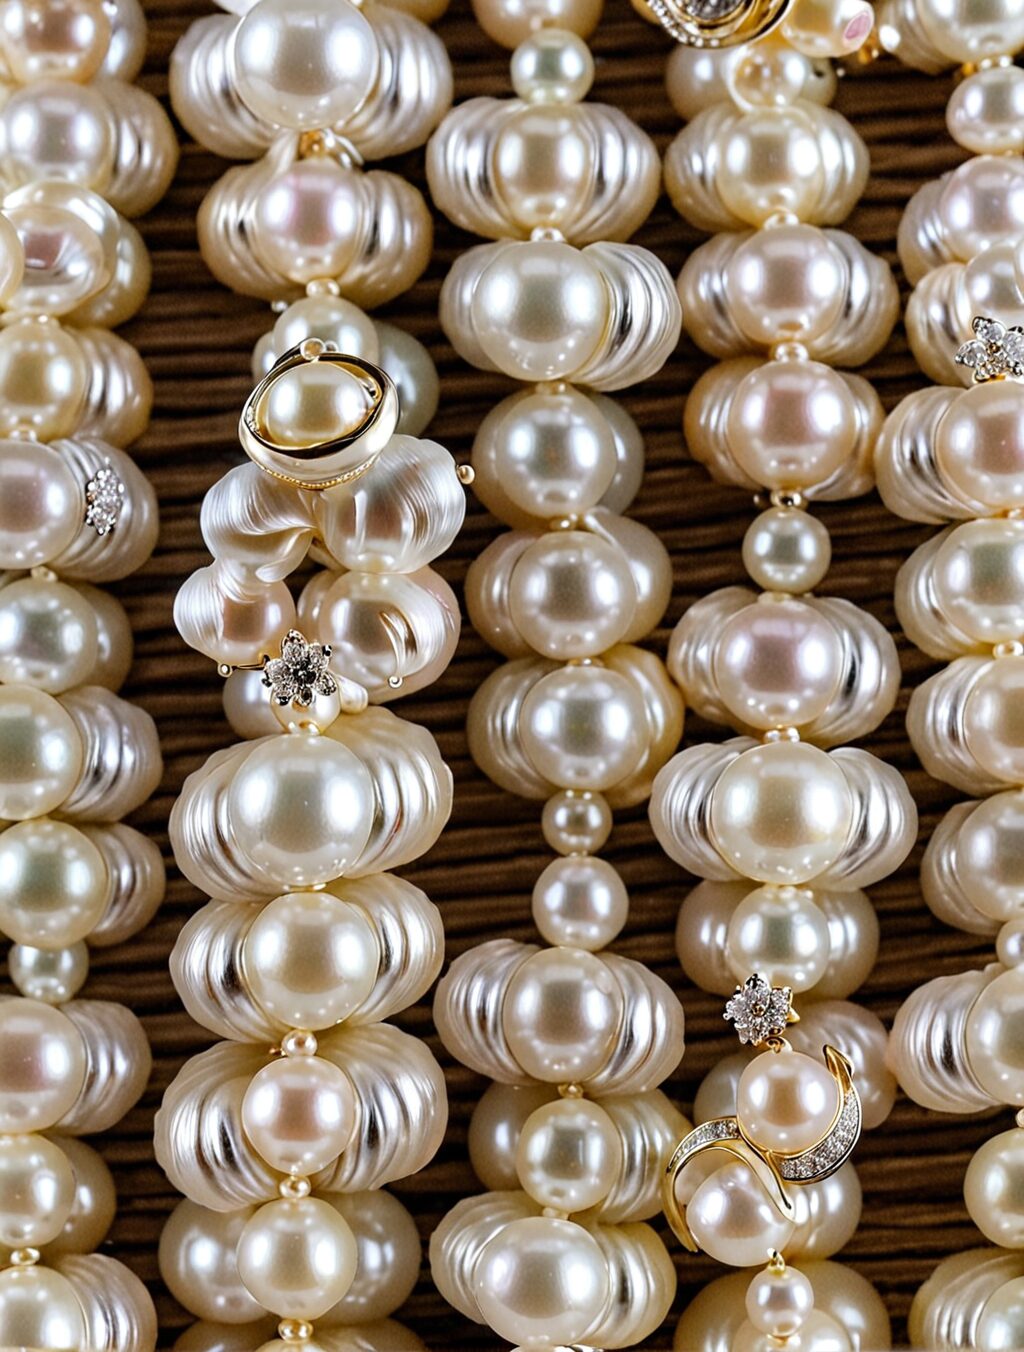 where can i buy pearls in japan